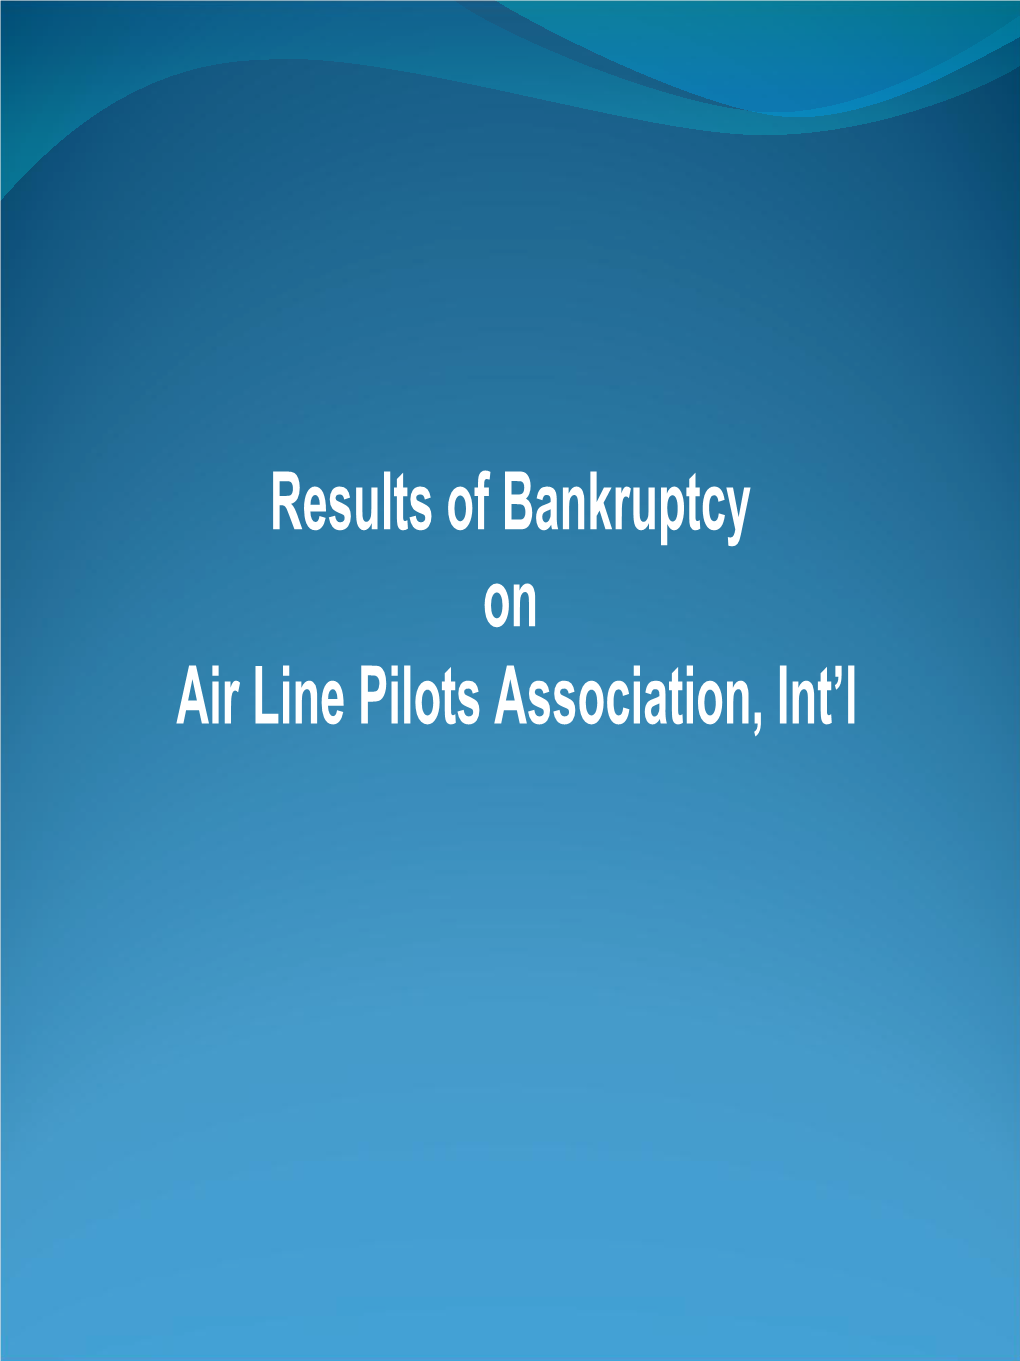 Results of Bankruptcy on Air Line Pilots Association, Int’L Airline Bankruptcies